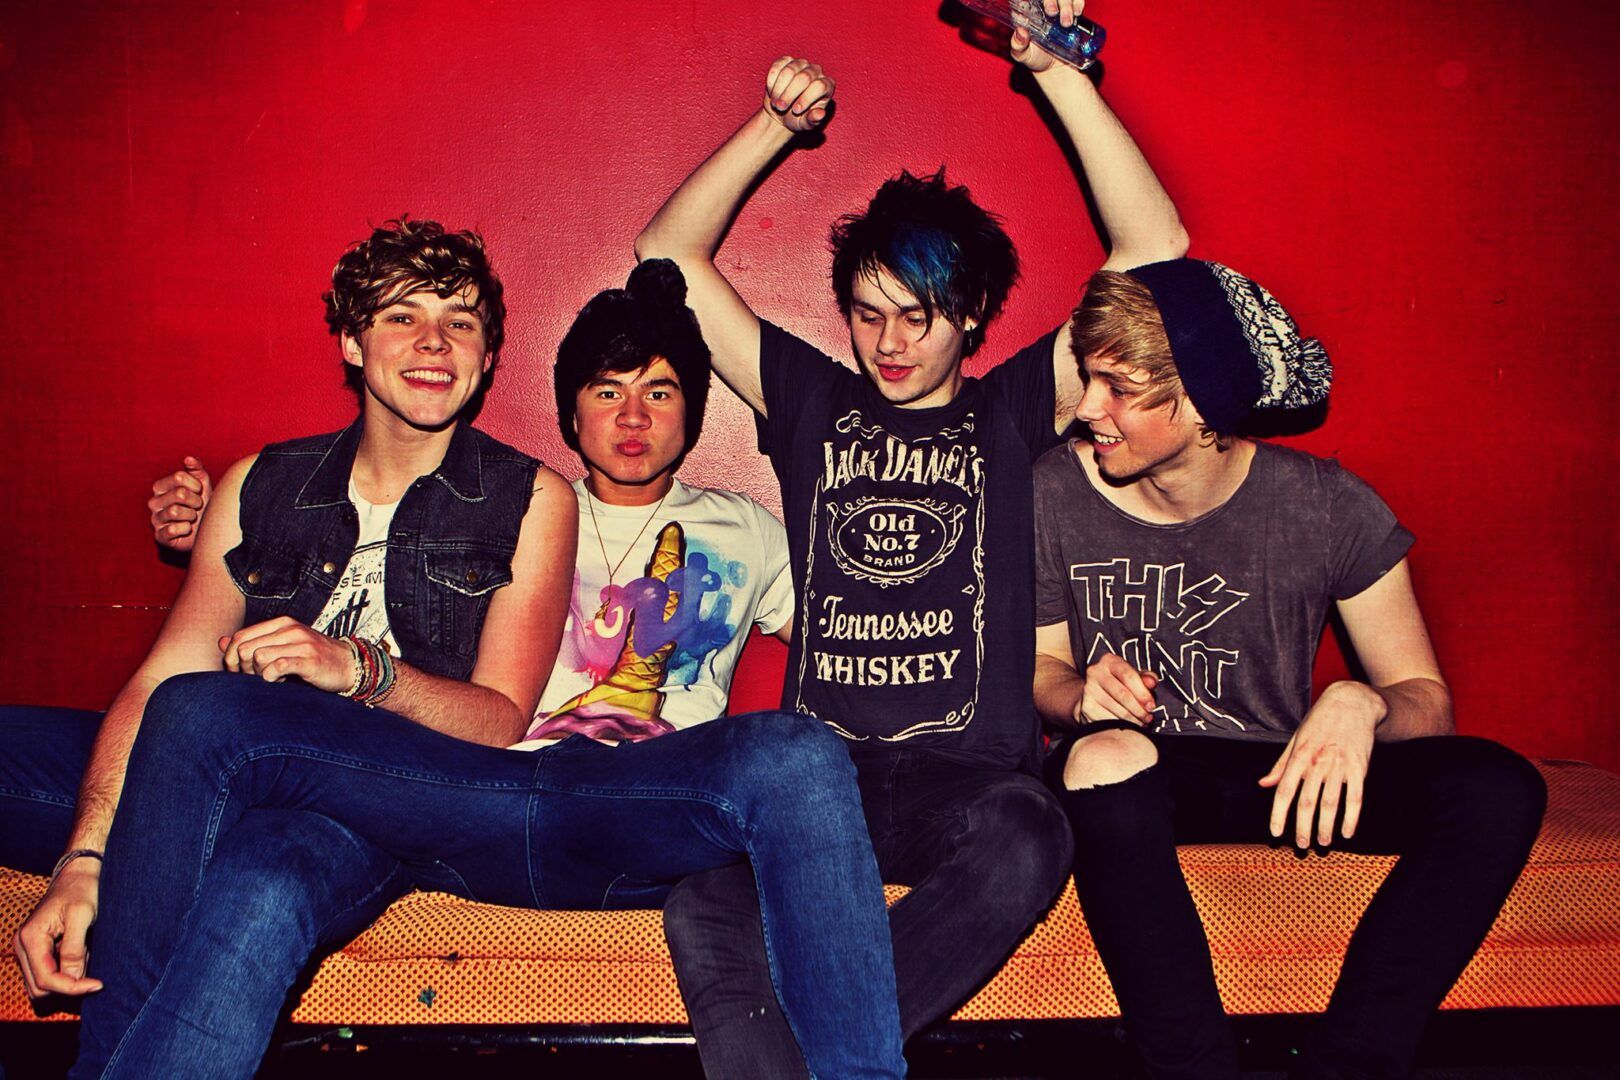 5 Seconds Of Summer Join One Direction’s Europe/UK Legs of “Where We Are Tour”